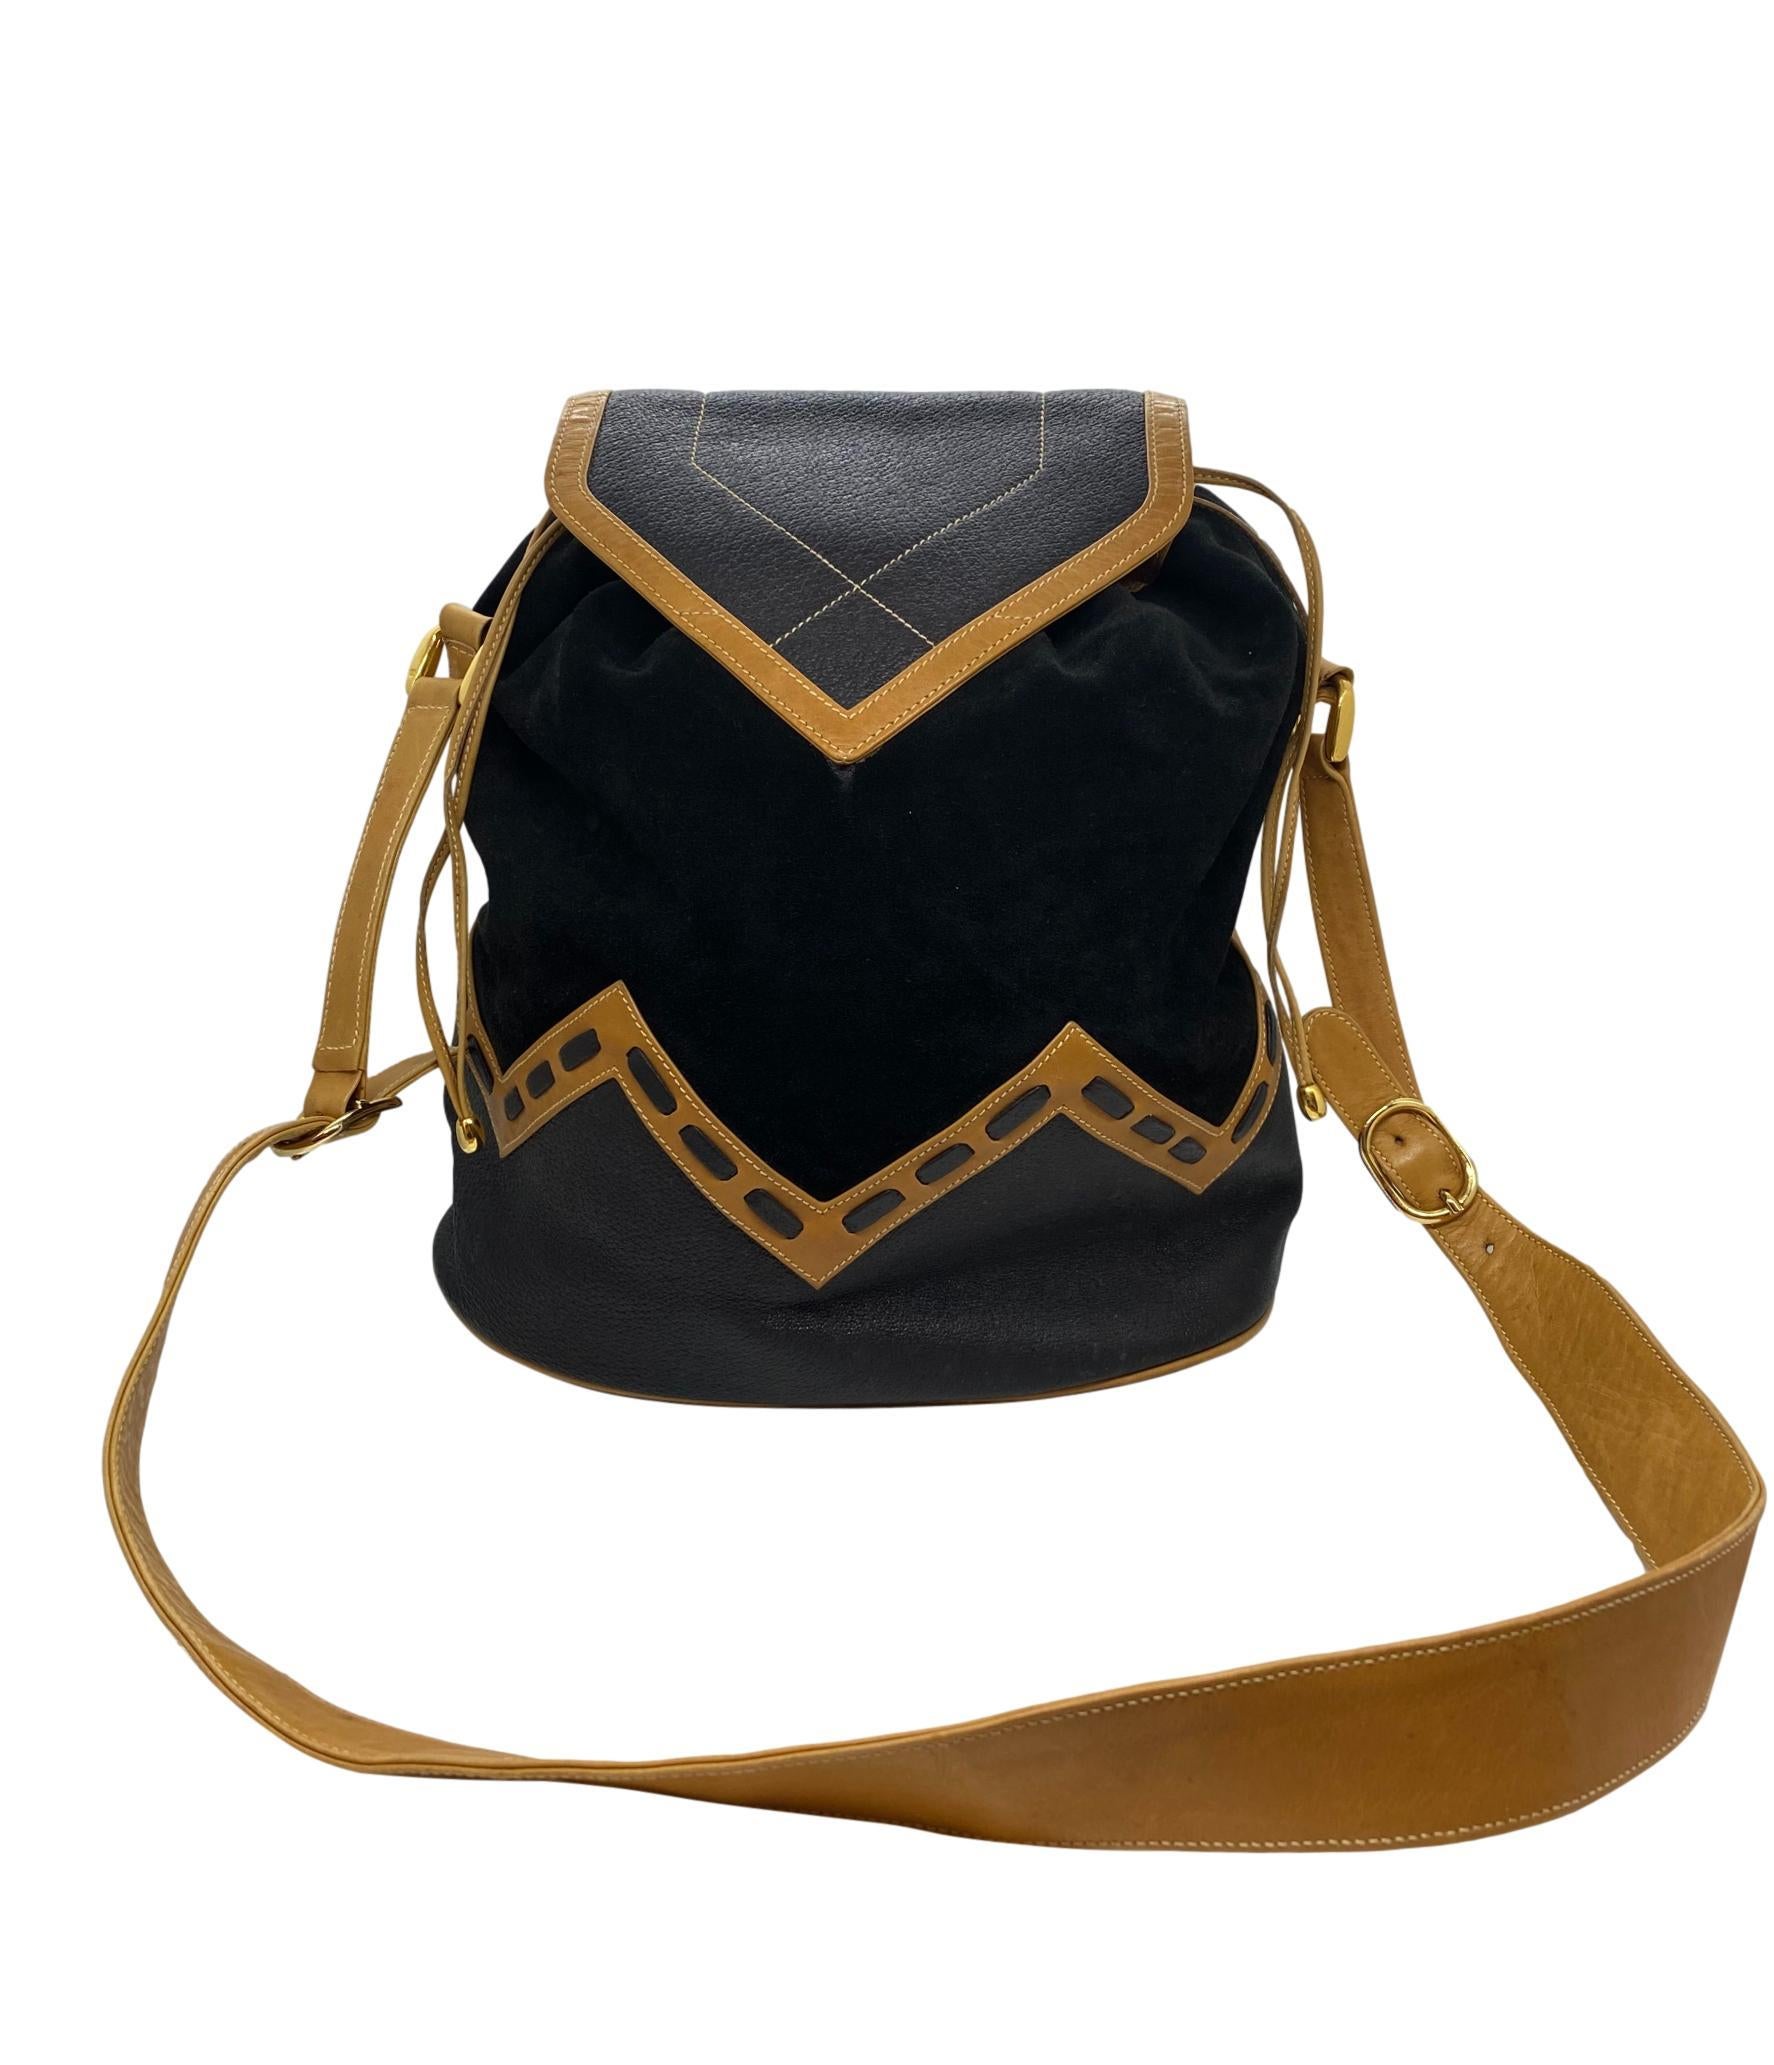 Rare Gucci Tri-Color Diamante Line Leather and Suede Drawstring Bucket Bag, 1980. First introduced in the early 1950's by the iconic fashion house, the bucket bag debuted as the 